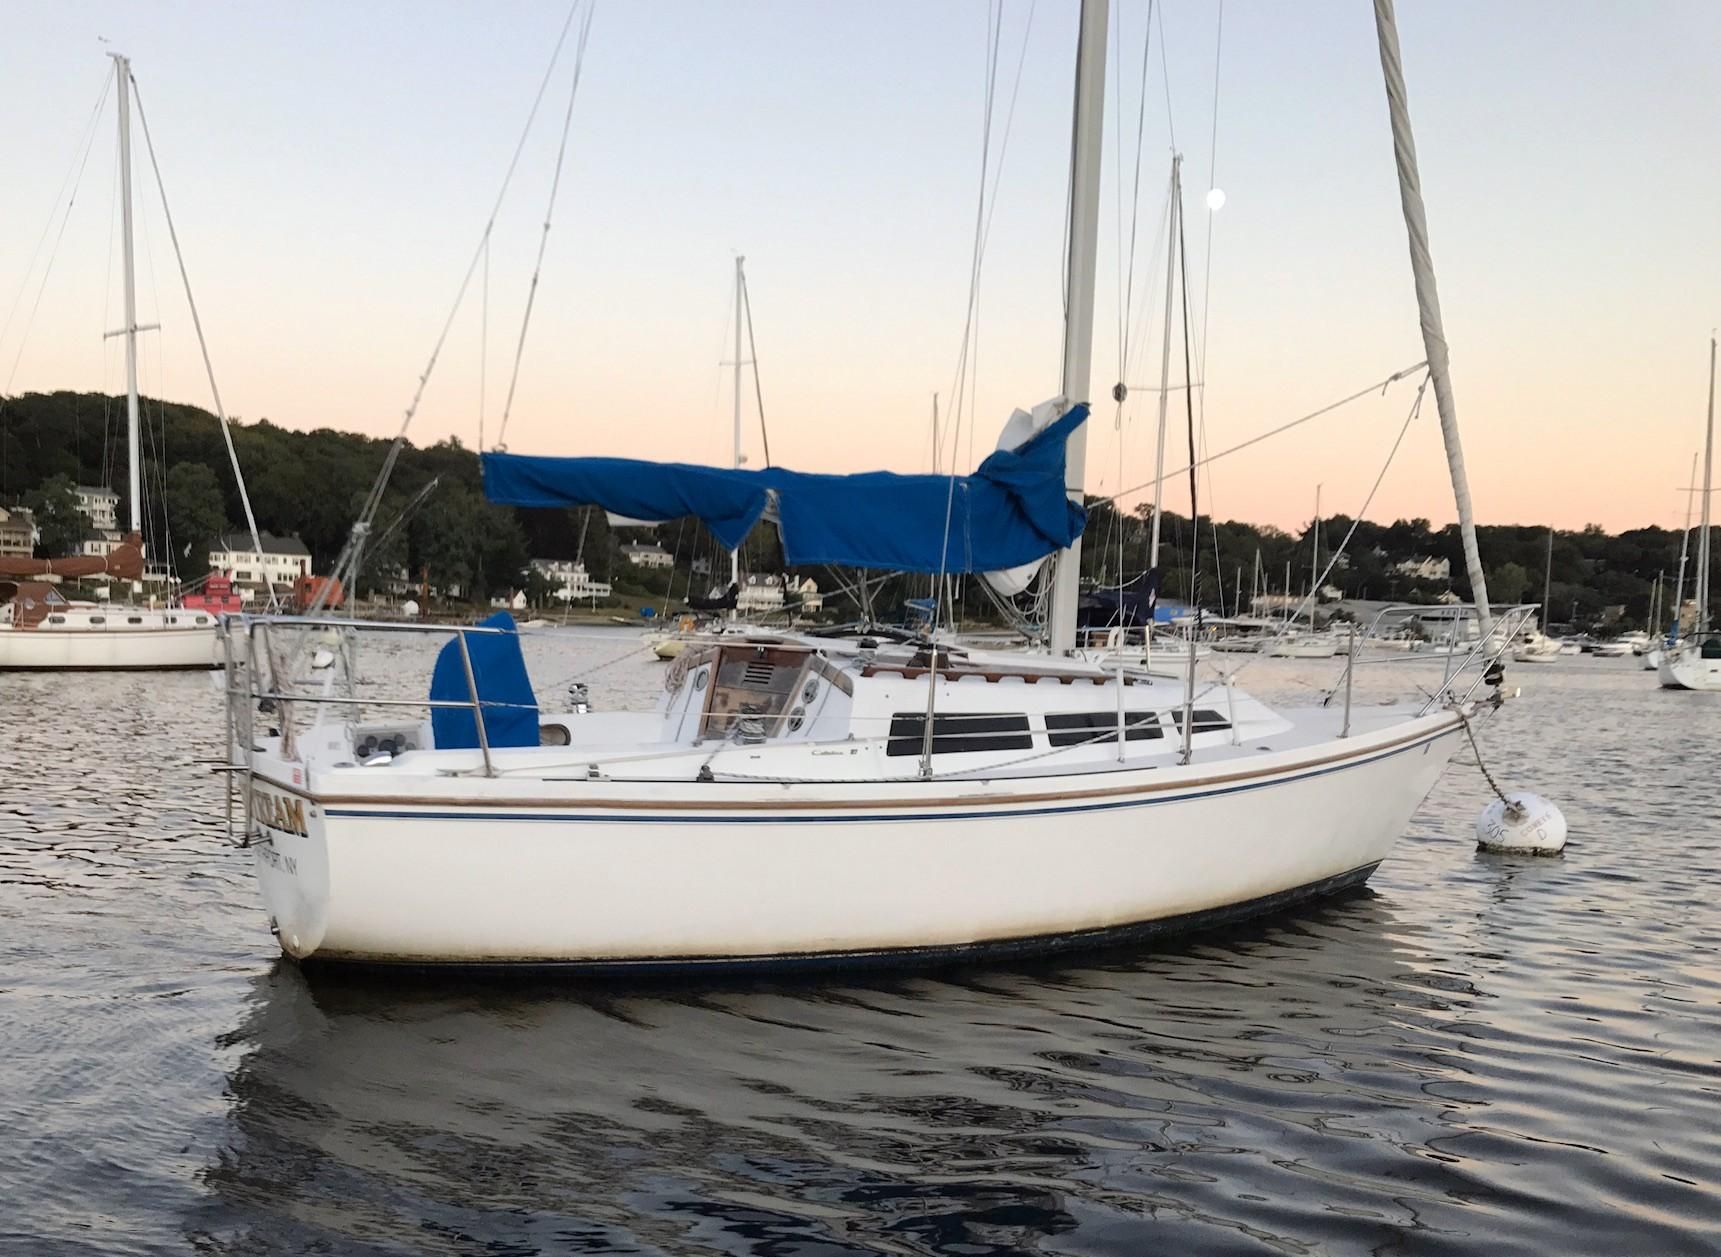 27' catalina sailboat for sale